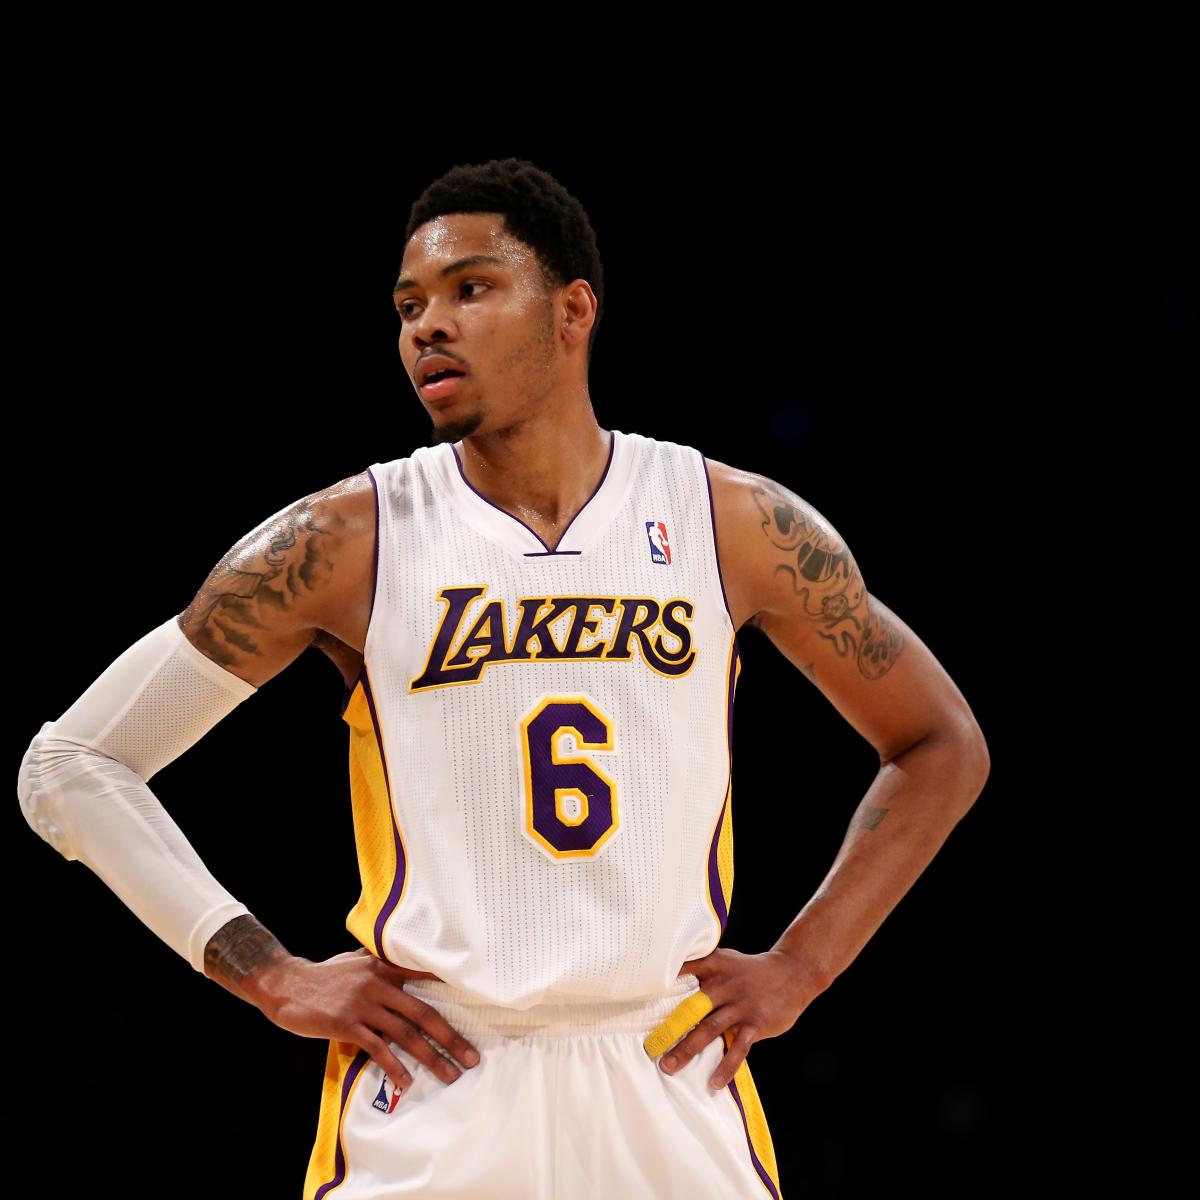 NBA news: Kent Bazemore leaves Warriors for Lakers - Golden State